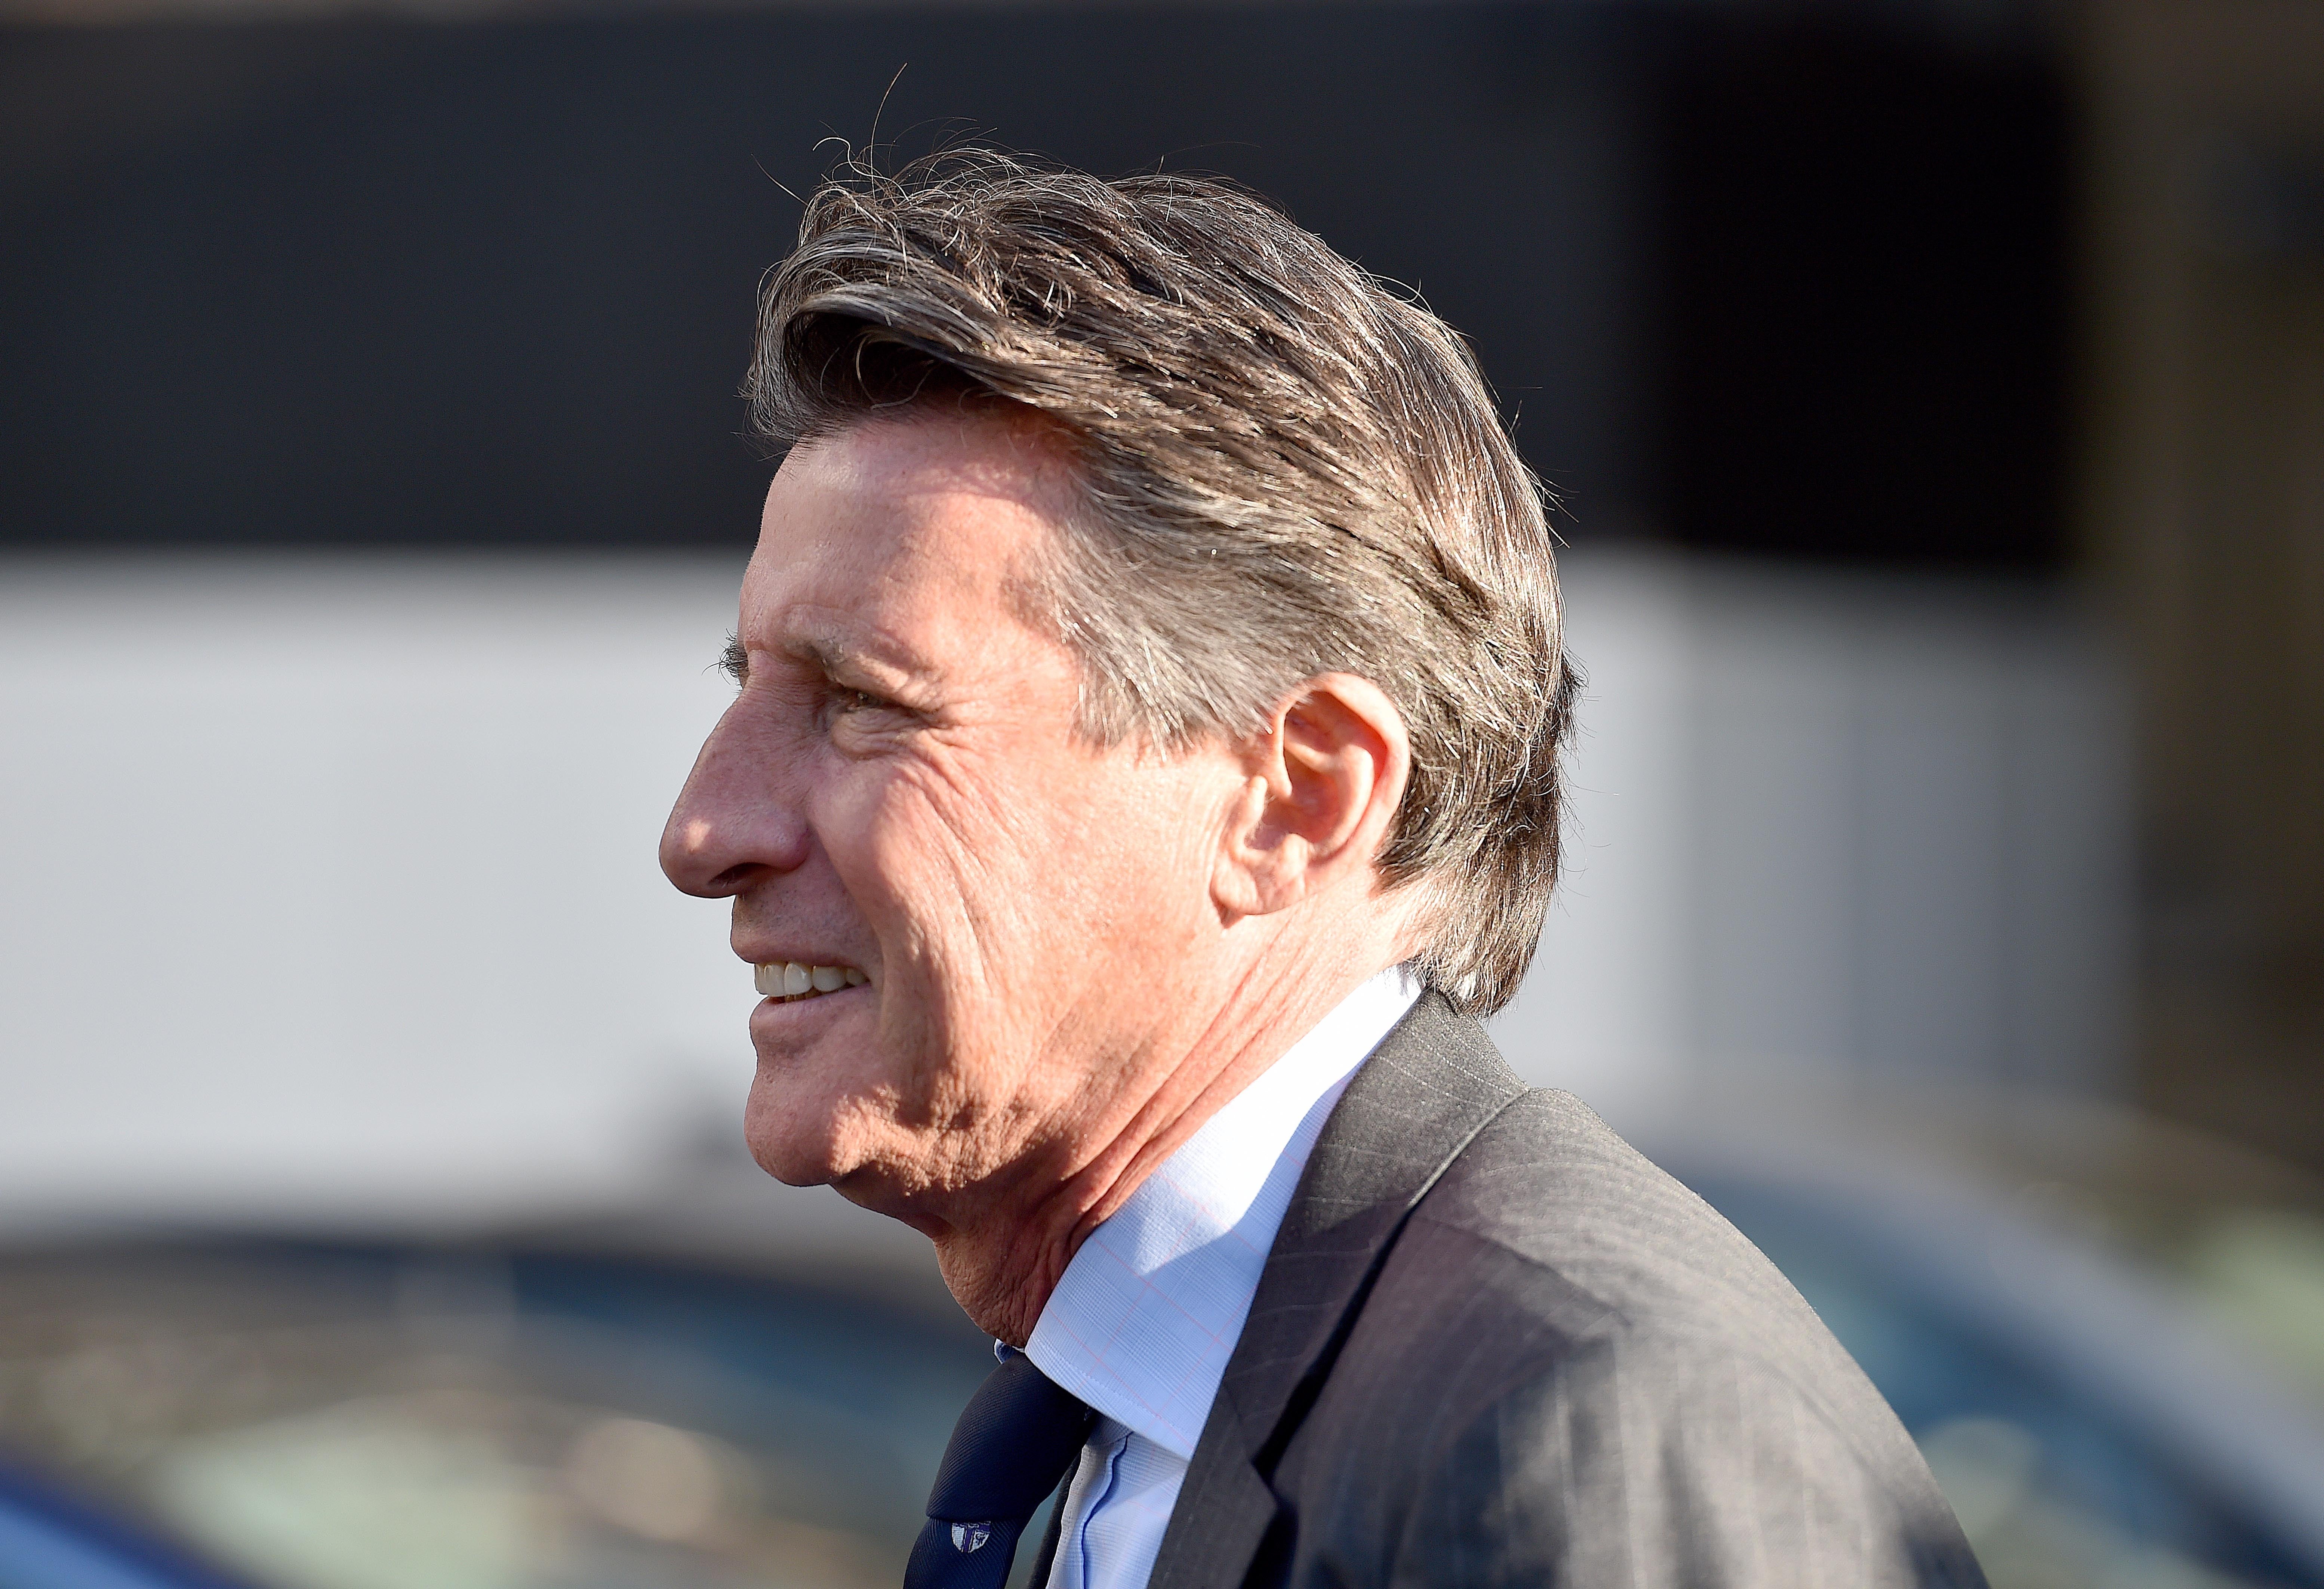 Lord Sebastian Coe, pictured, has joined forced with Sir Martin Broughton on a bid to buy Chelsea (Nick Ansell/PA)